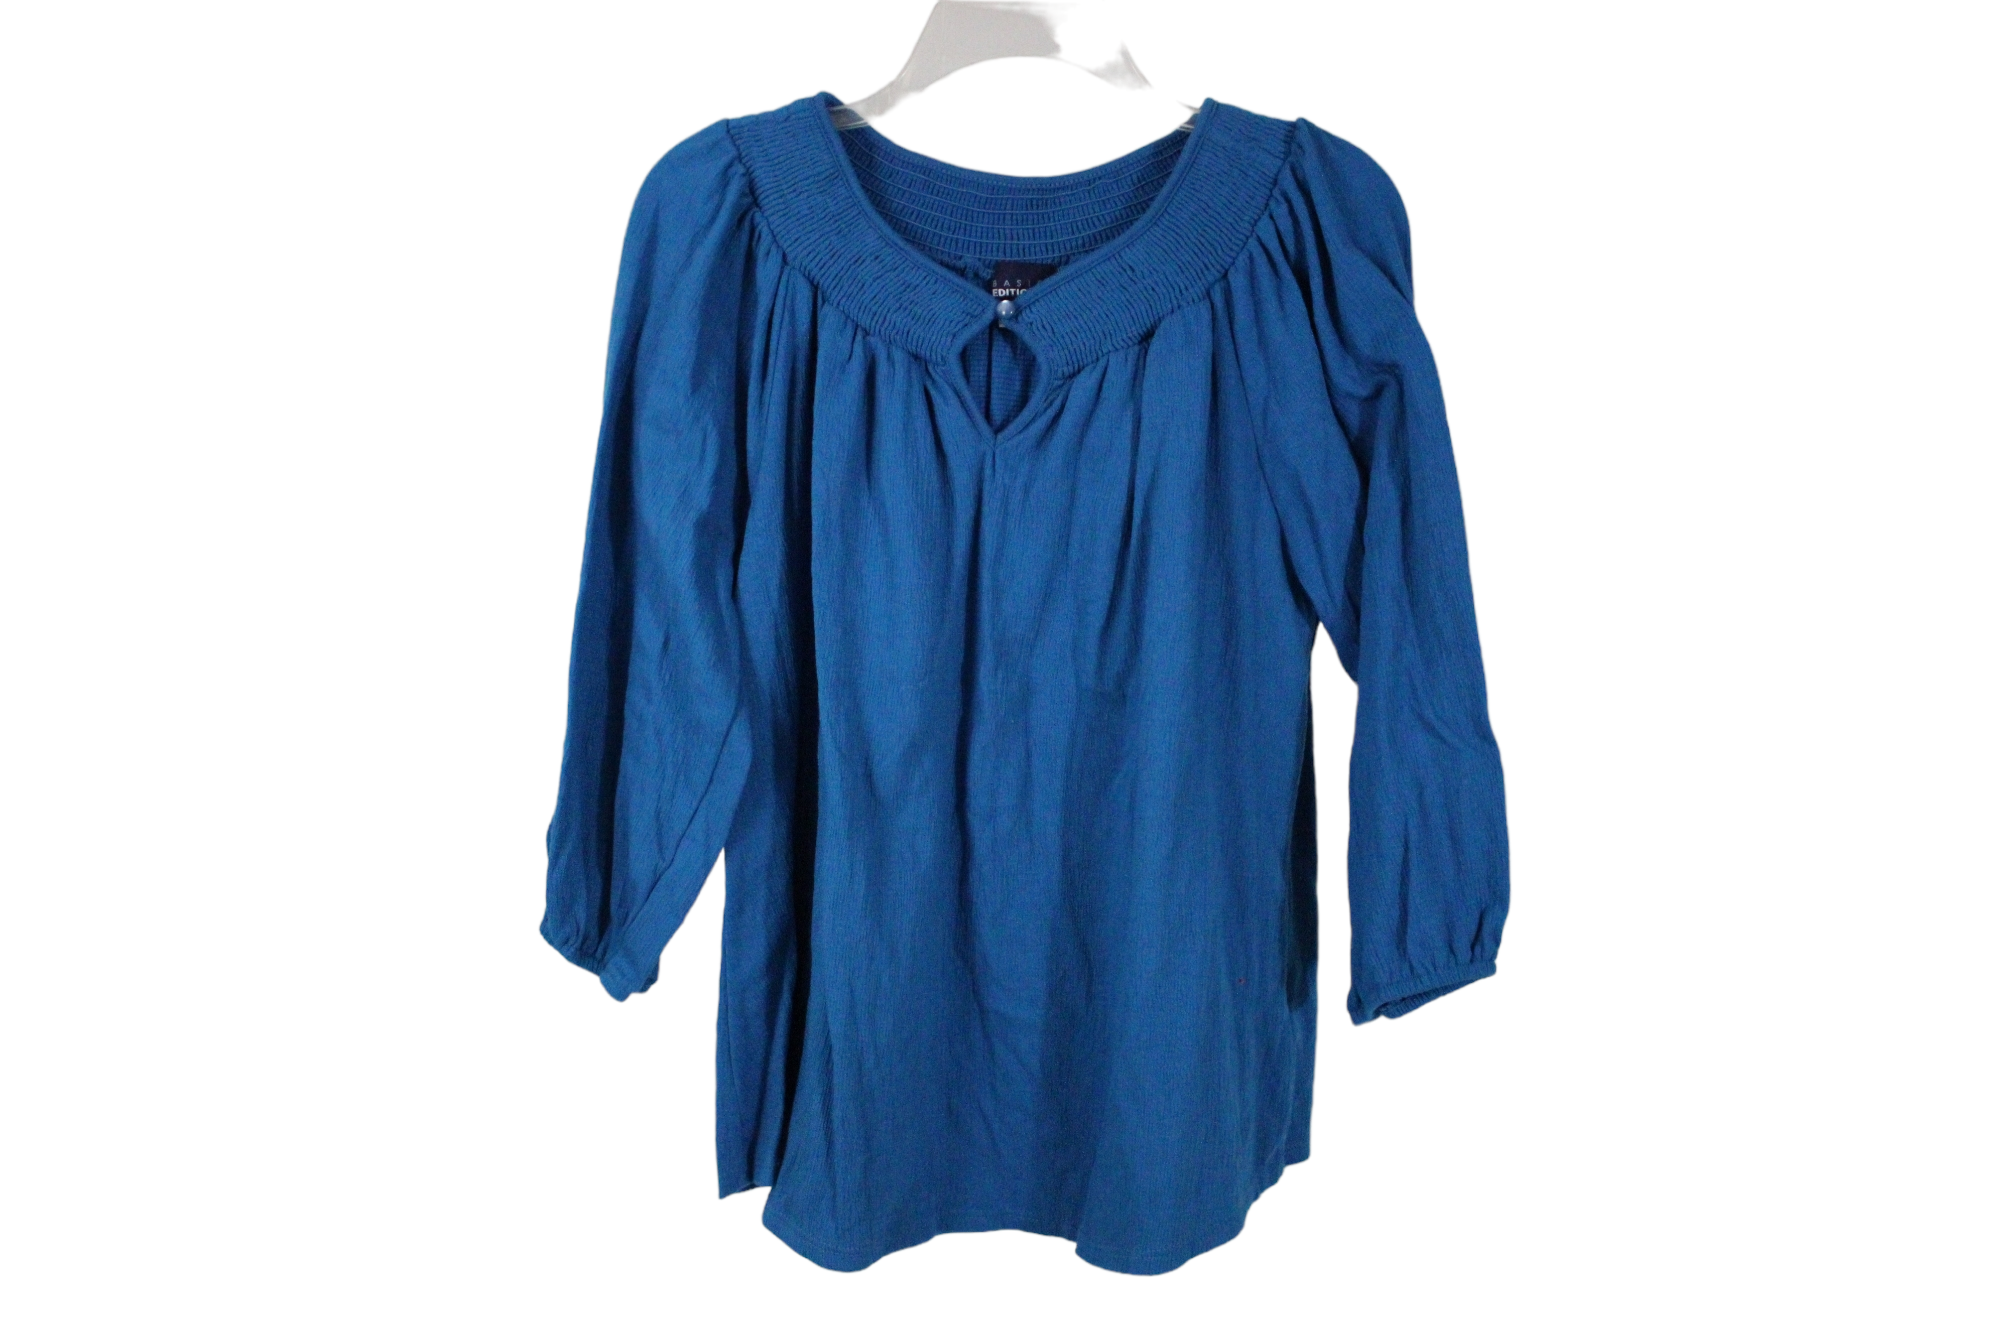 Basic Editions Blue Top | 1X